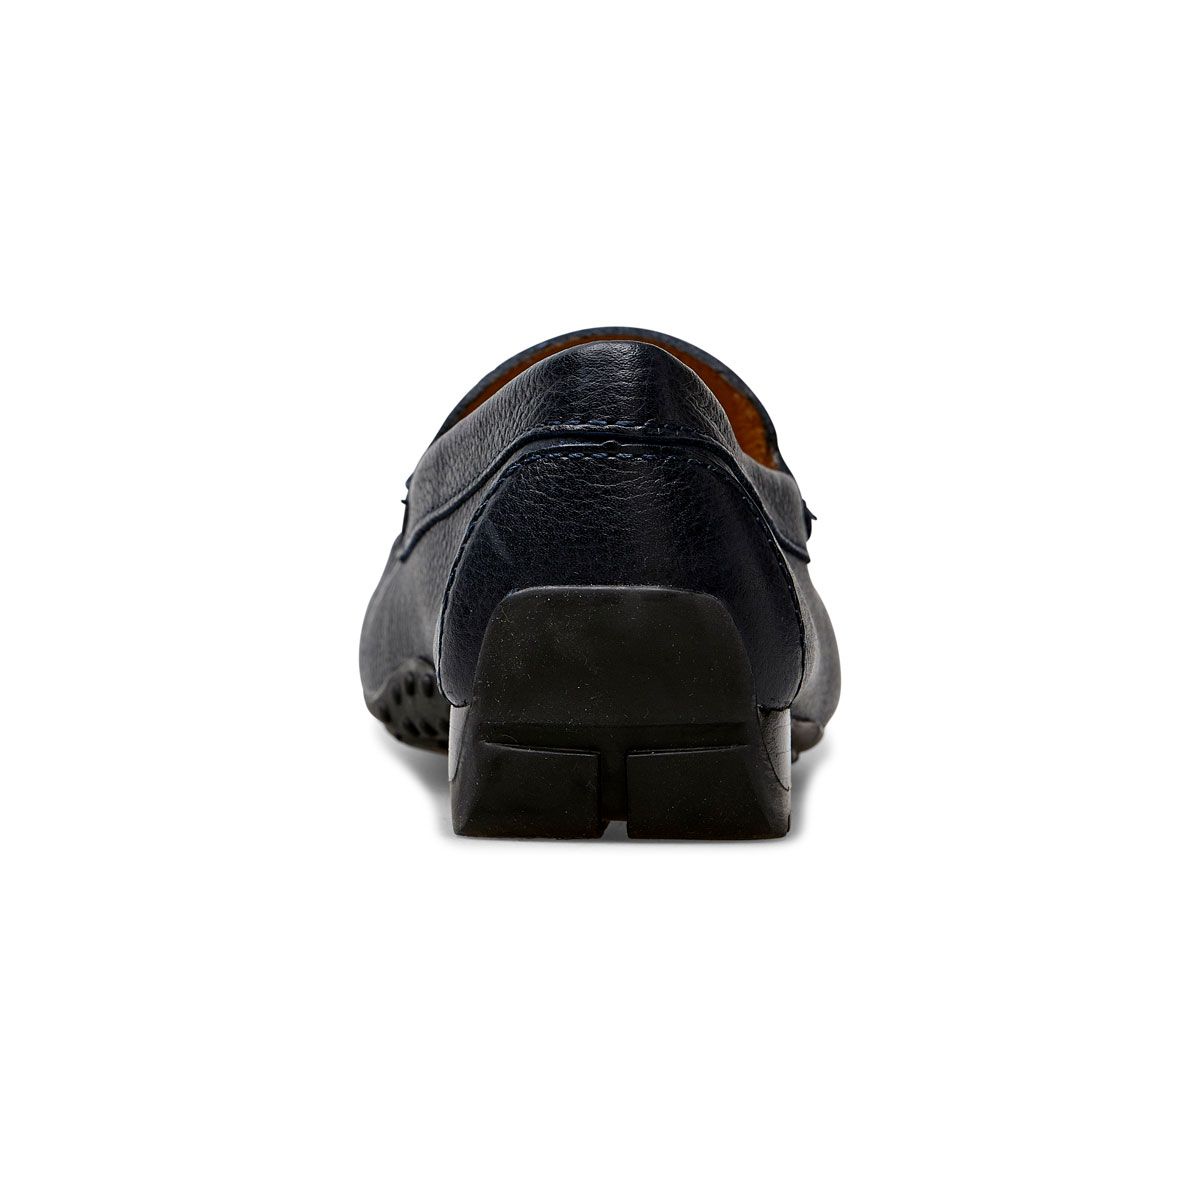 Van Dal Shoes - Sanson Loafers in Navy Leather